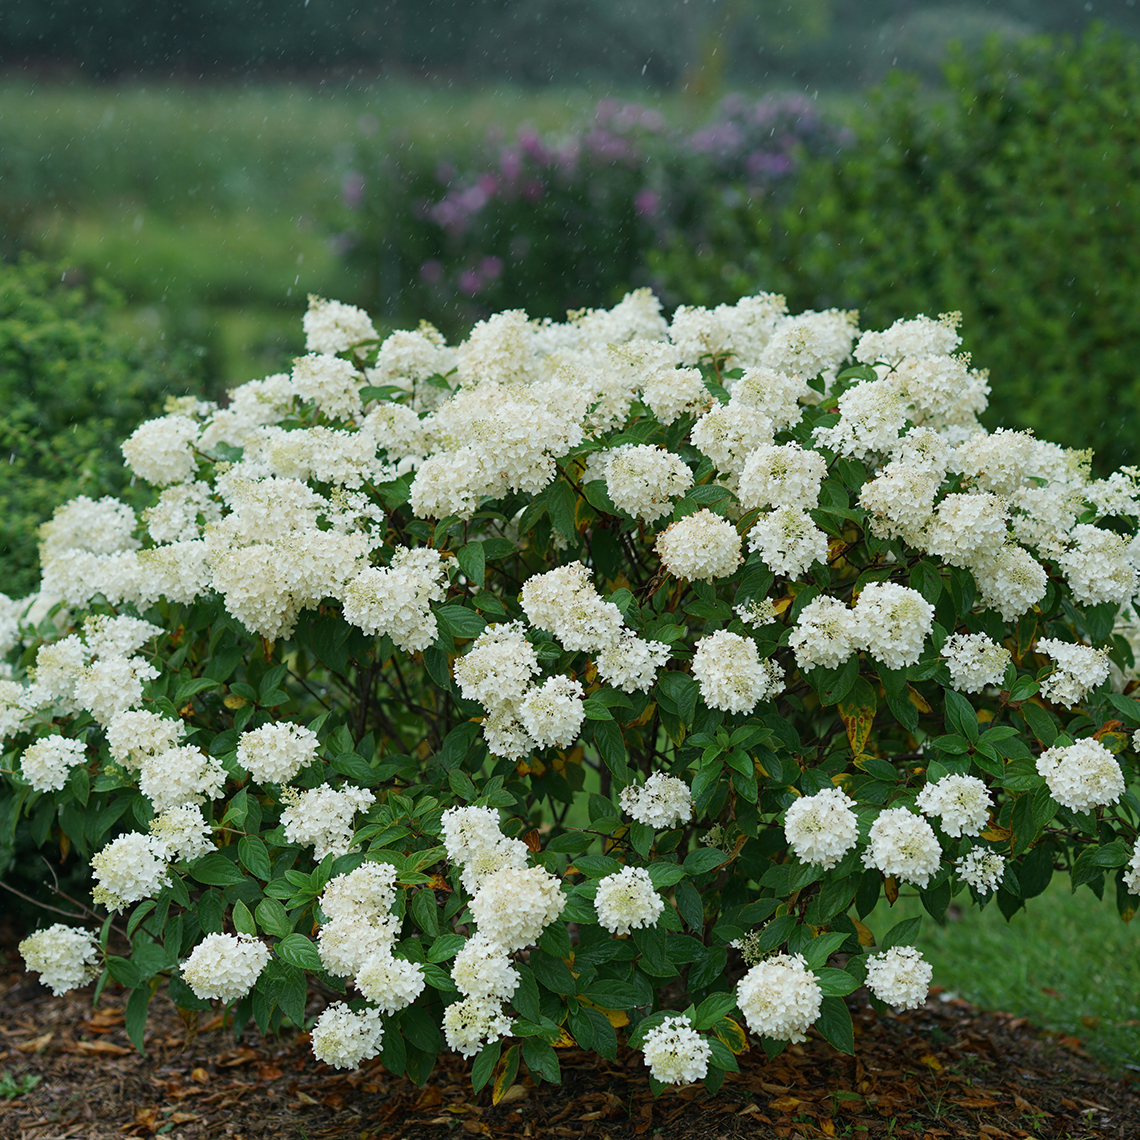 A specimen of Little Lamb hydrangea blooming in a landscape showing its abundant white flowers and wider than tall habit